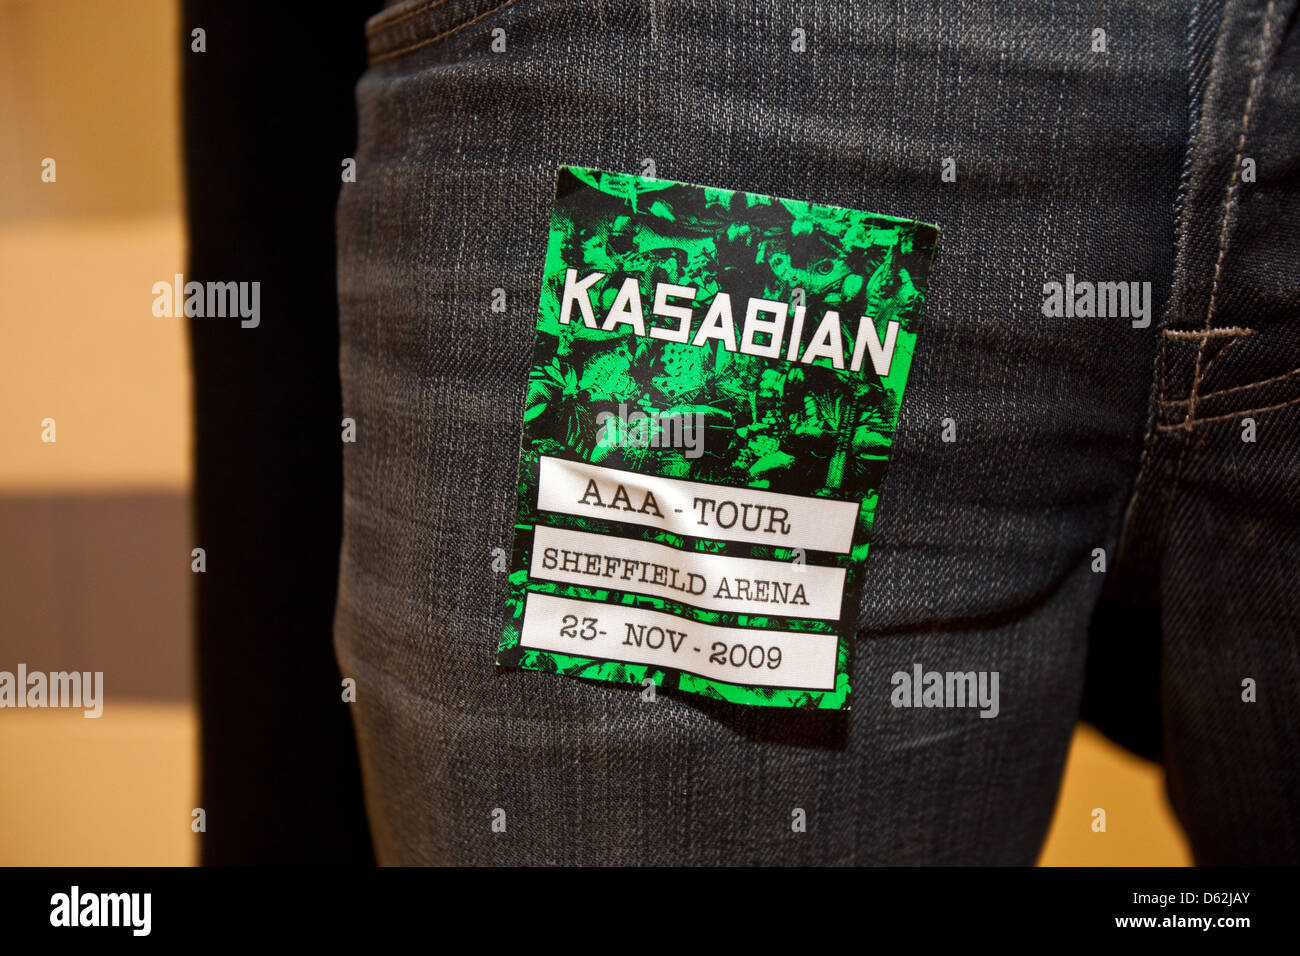 Kasabian backstage pass à Sheffield Arena. South Yorkshire, Angleterre, Royaume-Uni. Banque D'Images